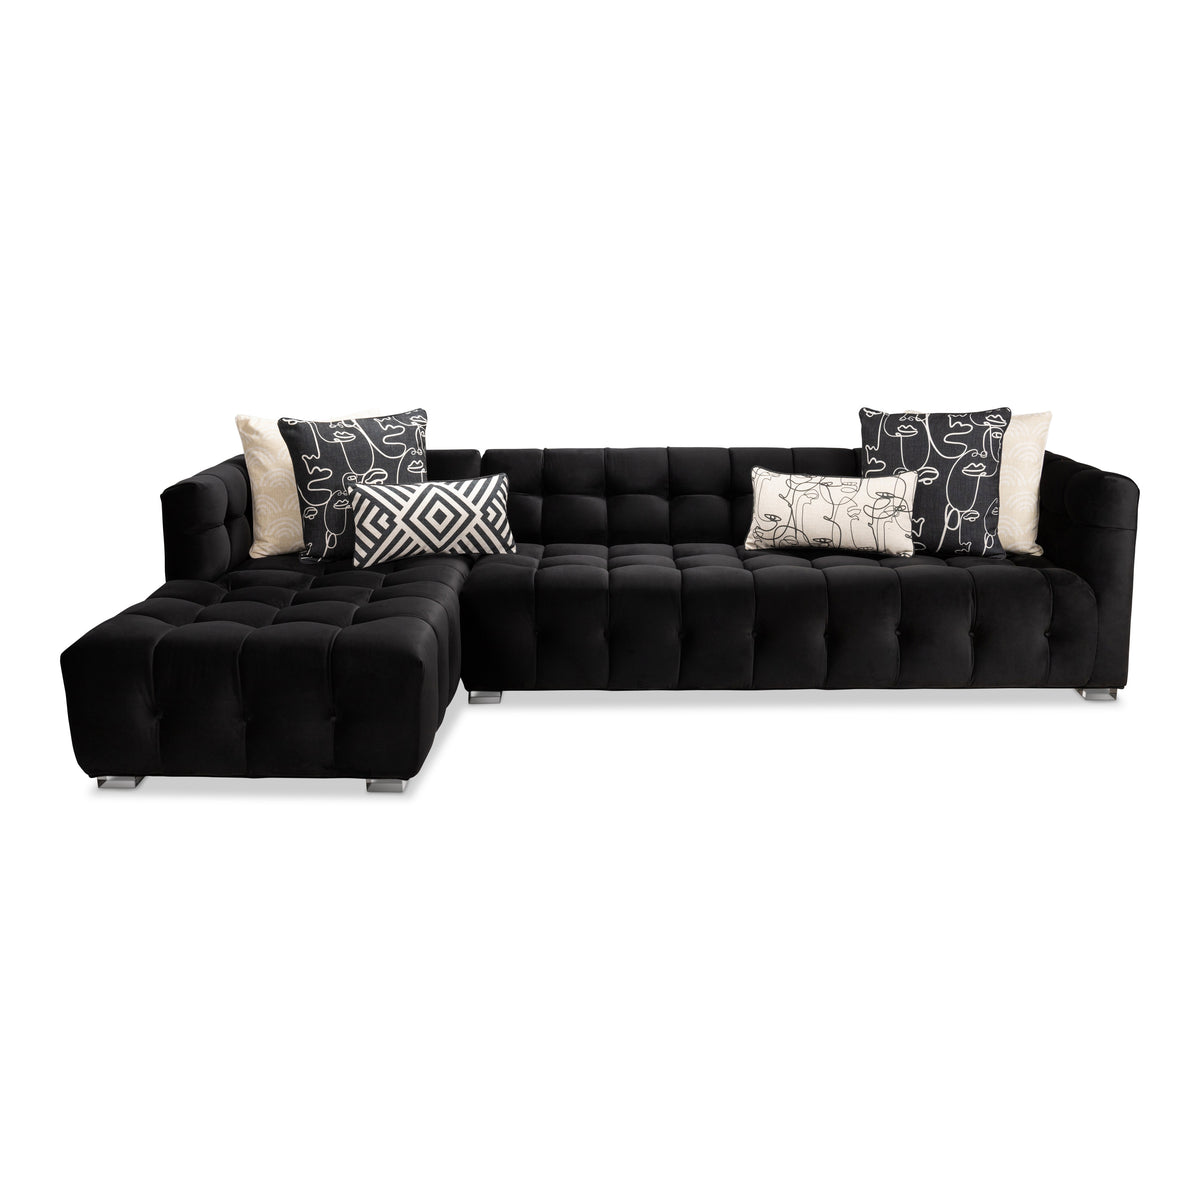 Delano Sectional w/ Chaise in Royale Onyx